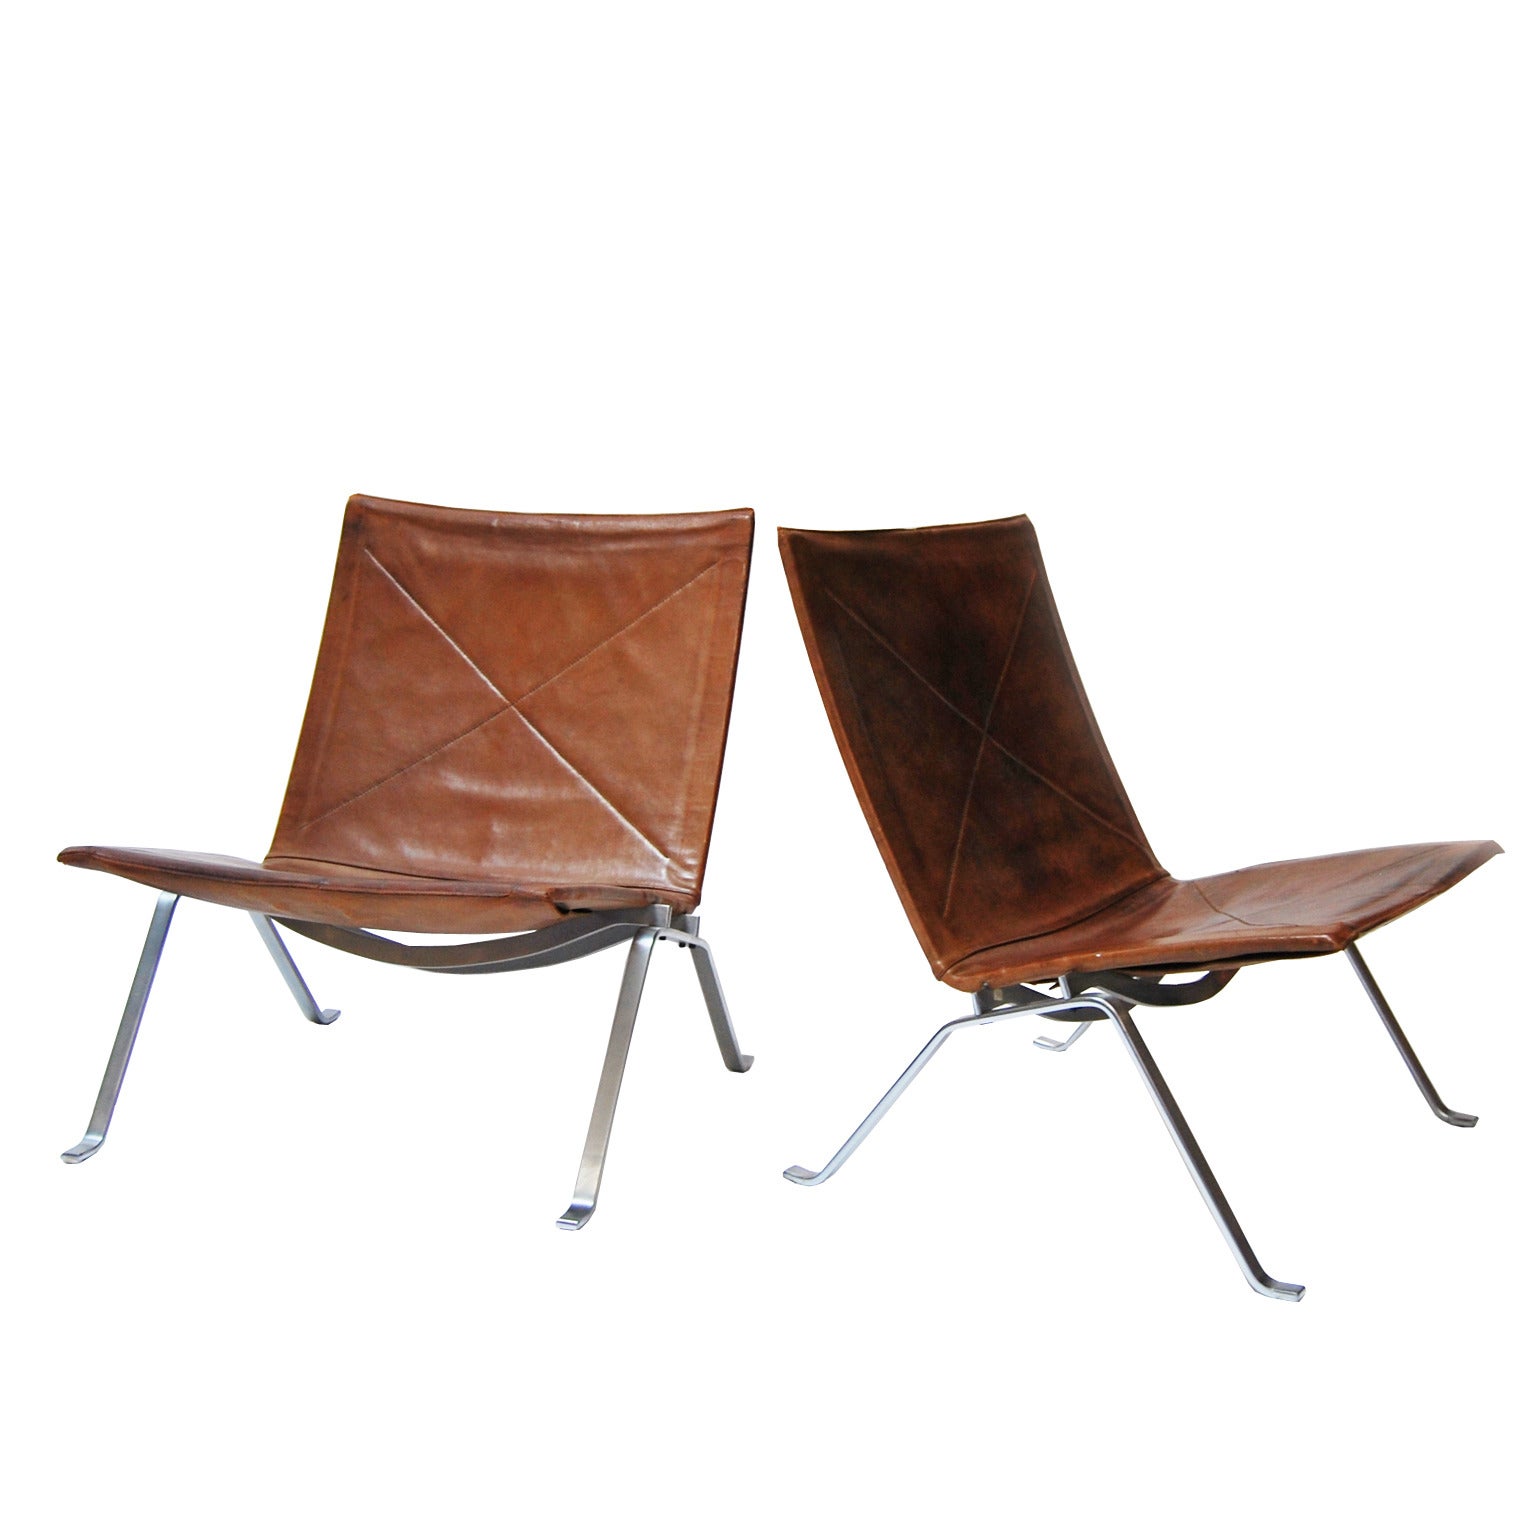 Pair of PK22 Lounge Chairs by Poul Kjaerholm Manufactured by E. Kold Christensen